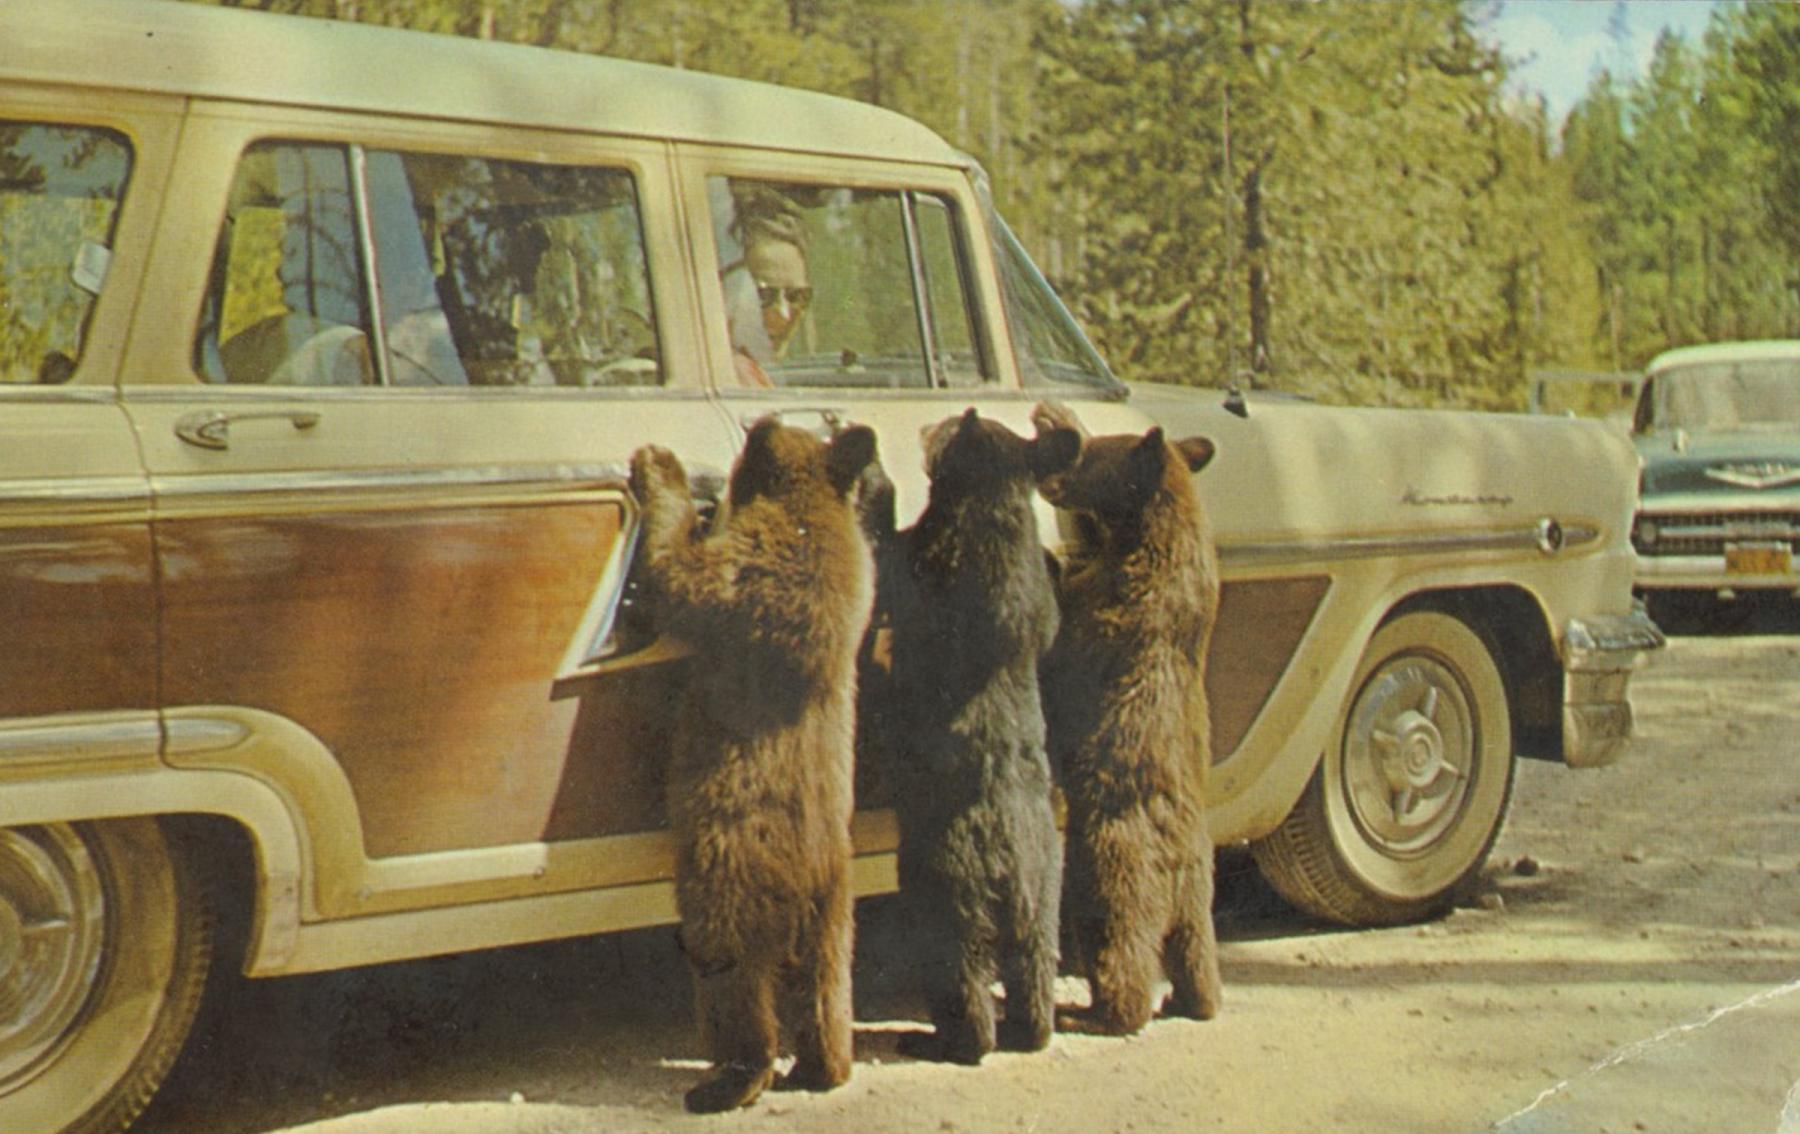 Tourism boomed in the postwar economy of the 1950s; in 1956, nearly 1.5 million people visited Yellowstone Park. Postcard sales boomed too. On this postcard, some harmless-looking bear cubs beg for food in Yellowstone. American Heritage Center.